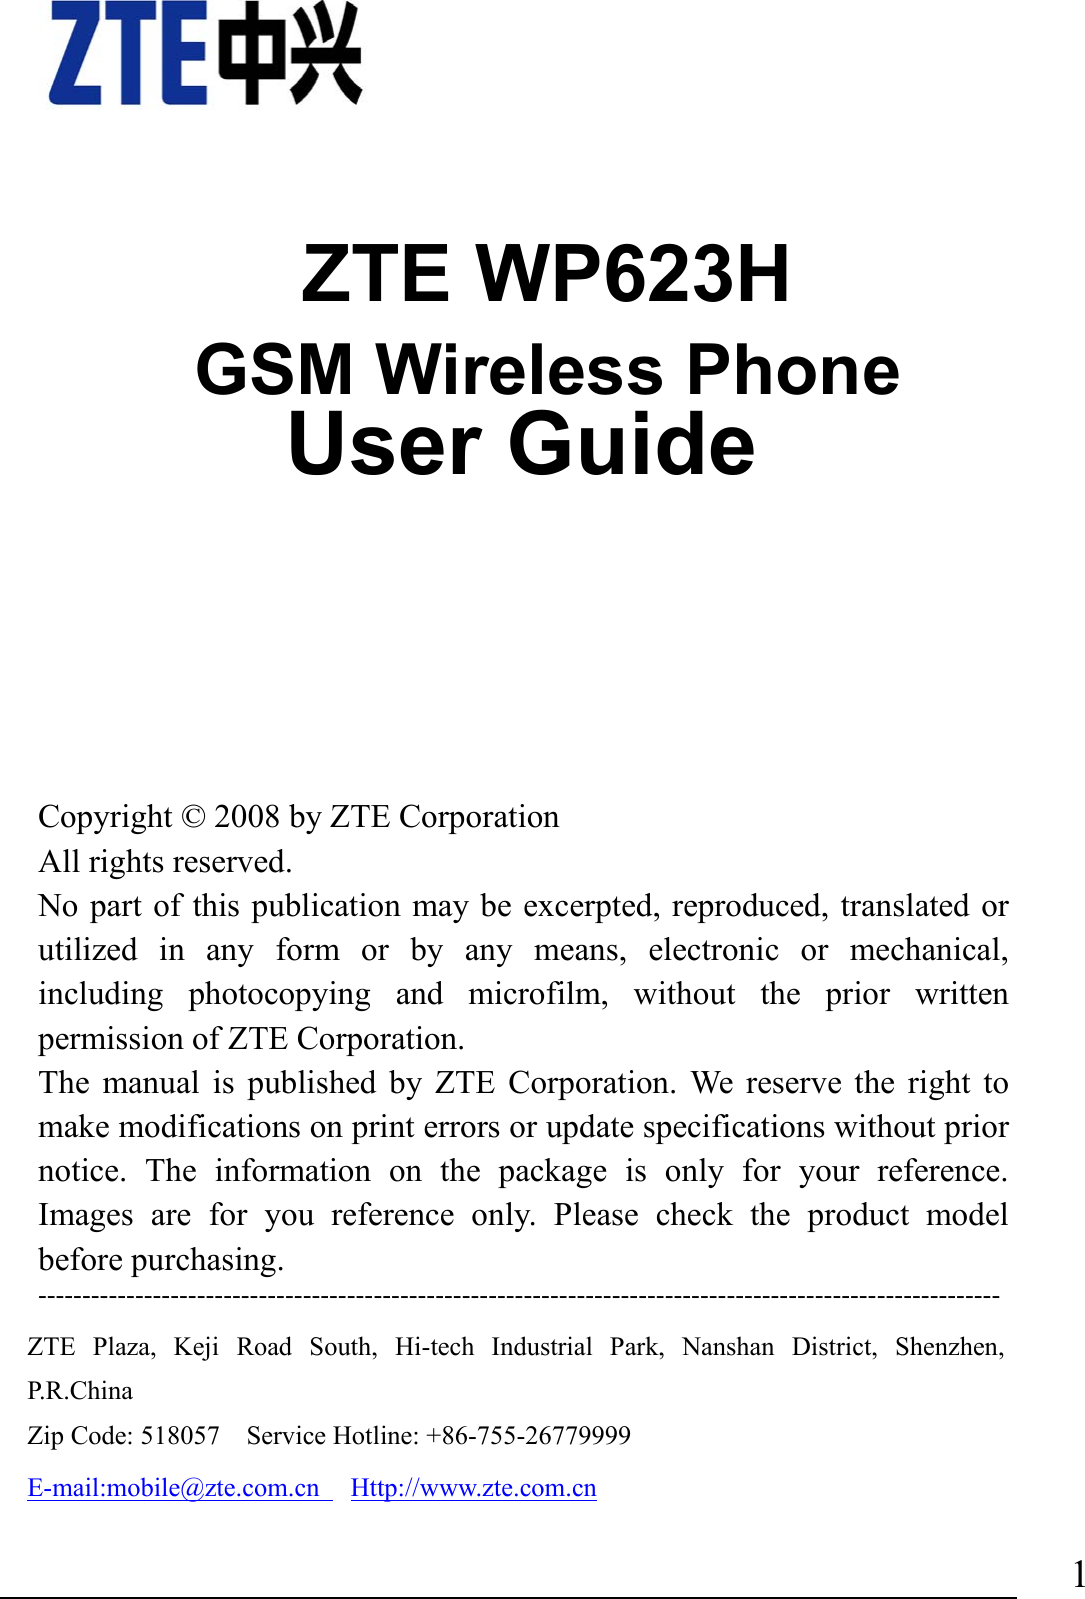                                1    ZTE WP623H GSM Wireless Phone               User Guide         Copyright © 2008 by ZTE Corporation All rights reserved. No part of this publication may be excerpted, reproduced, translated or utilized in any form or by any means, electronic or mechanical, including photocopying and microfilm, without the prior written permission of ZTE Corporation. The manual is published by ZTE Corporation. We reserve the right to make modifications on print errors or update specifications without prior notice. The information on the package is only for your reference. Images are for you reference only. Please check the product model before purchasing.   ---------------------------------------------------------------------------------------------------------------------------ZTE Plaza, Keji Road South, Hi-tech Industrial Park, Nanshan District, Shenzhen, P.R.China  Zip Code: 518057    Service Hotline: +86-755-26779999     E-mail:mobile@zte.com.cn   Http://www.zte.com.cn 